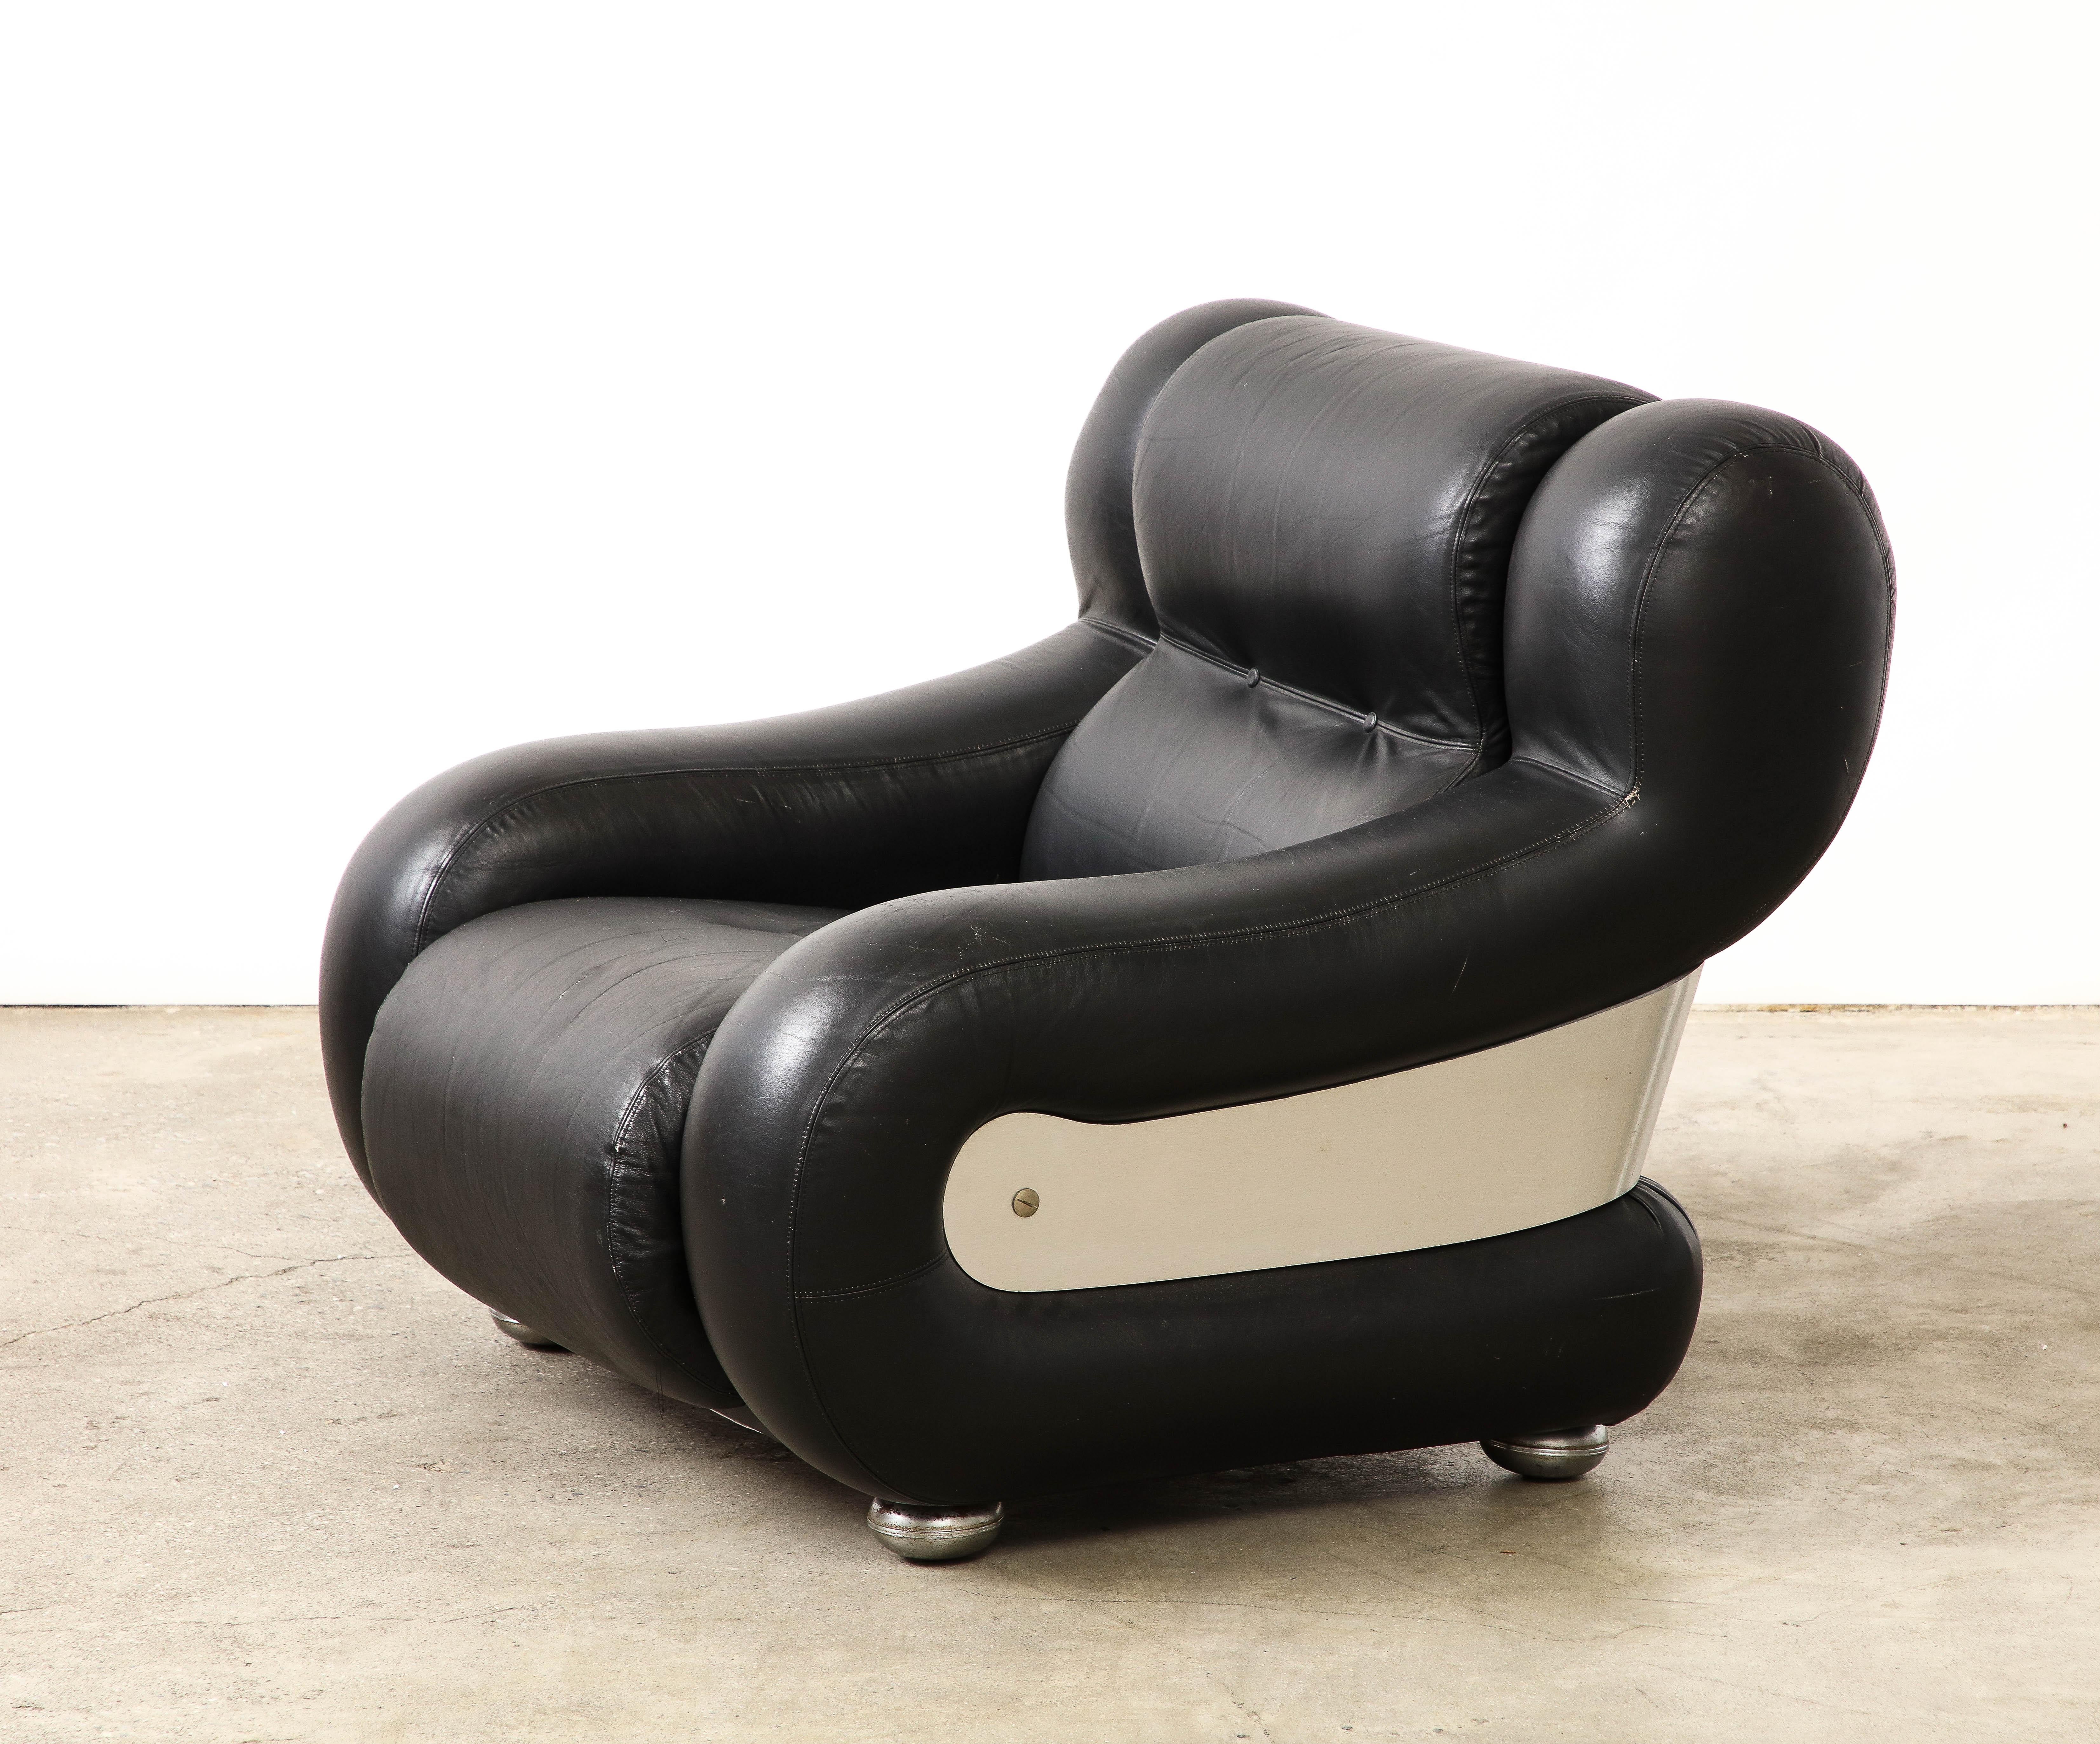 This armchair is reminiscent of Adriano Piazzesi's bold, quintessentially Italian designs.